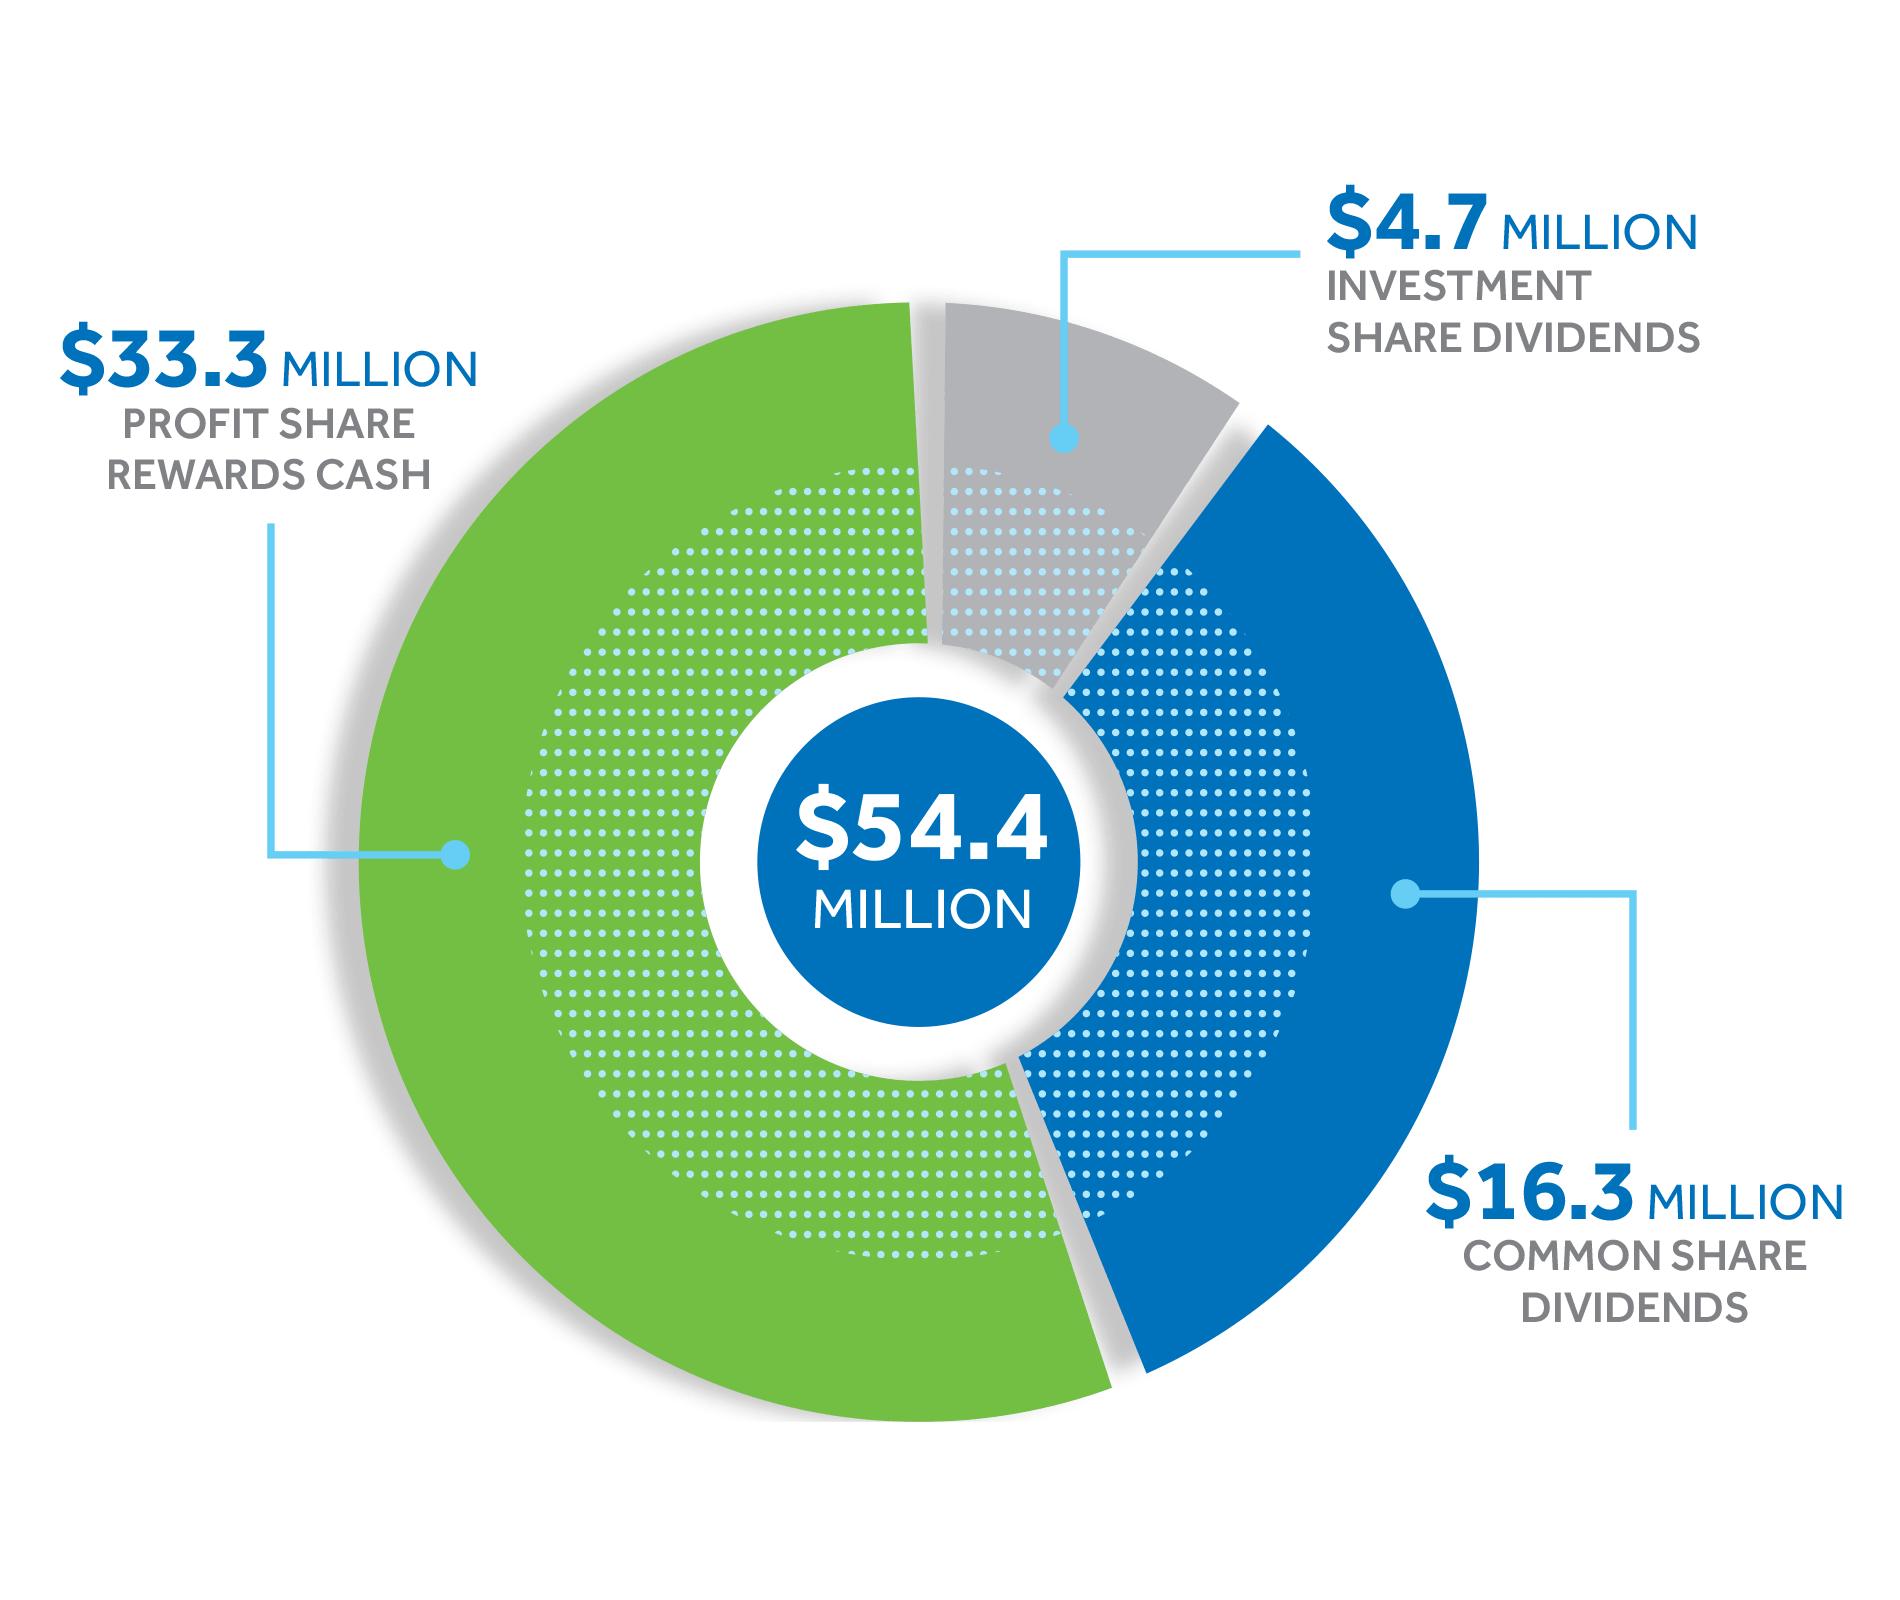 Profit Share Infographic for 2020. A pie chart showing the distribution of a total of $54.4 million Profit Share in 2020: $33.3 million for Profit Share Rewards cash. $4.7 million for investment share dividends. $16.3 million for common share dividends